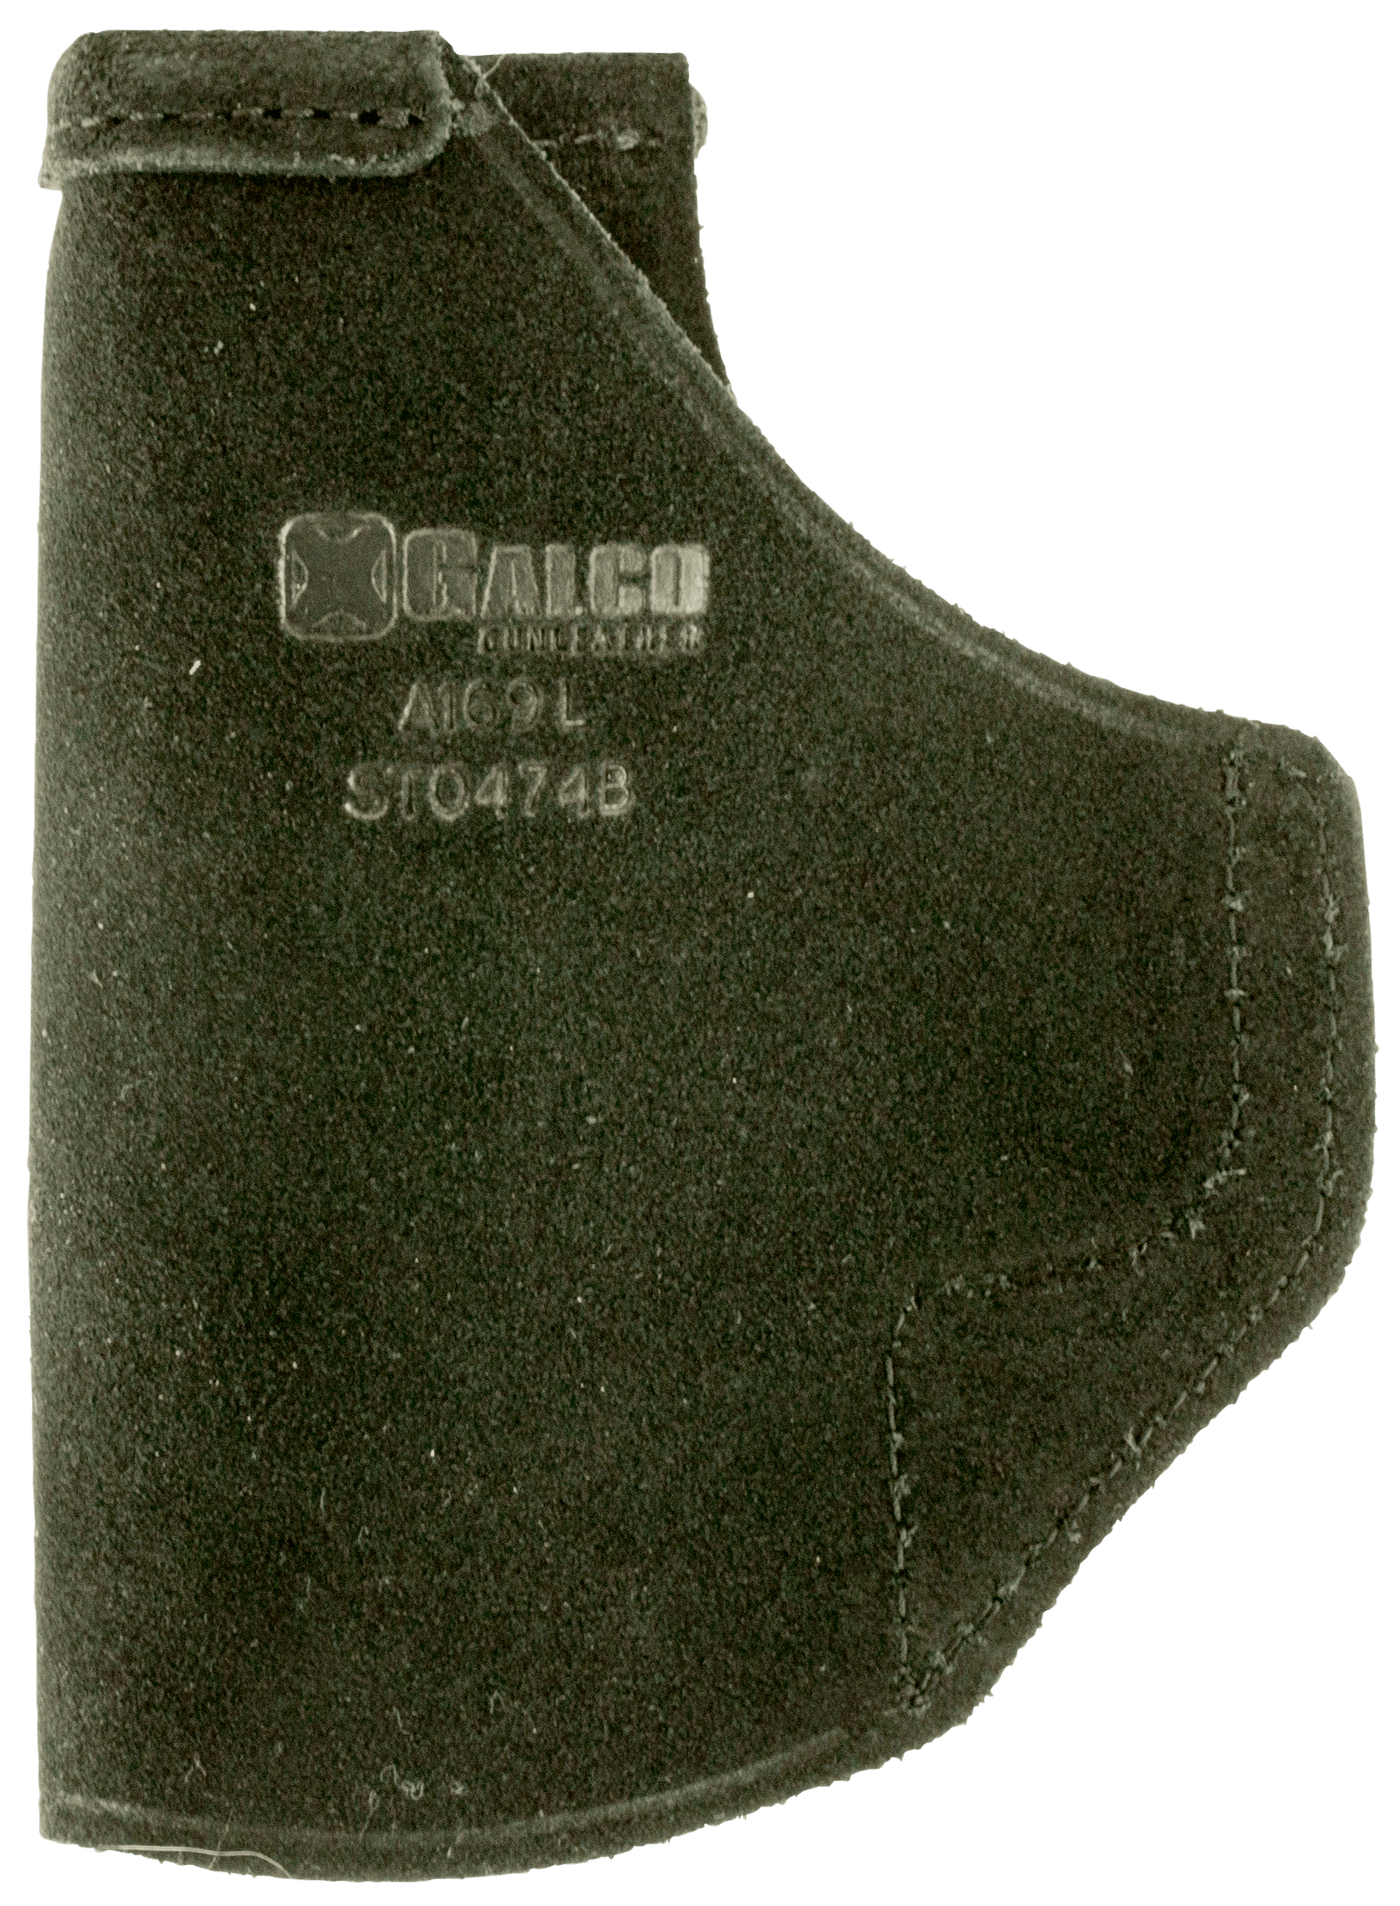 Galco Galco Stow-n-go Sw M&p Com Rh Blk Holsters